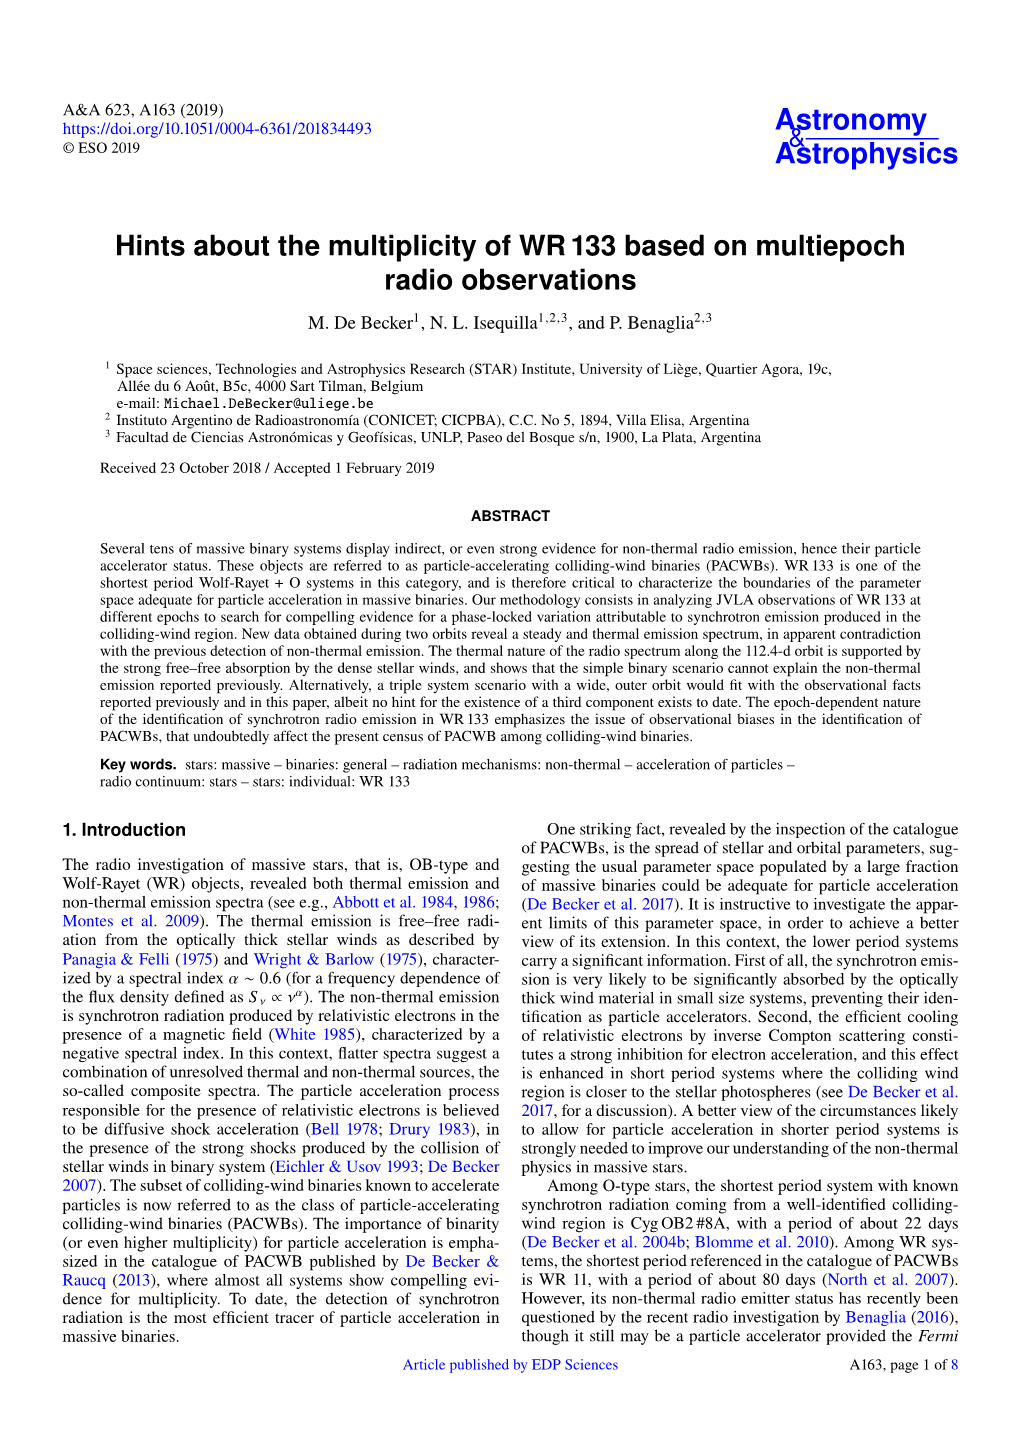 Hints About the Multiplicity of WR 133 Based on Multiepoch Radio Observations M